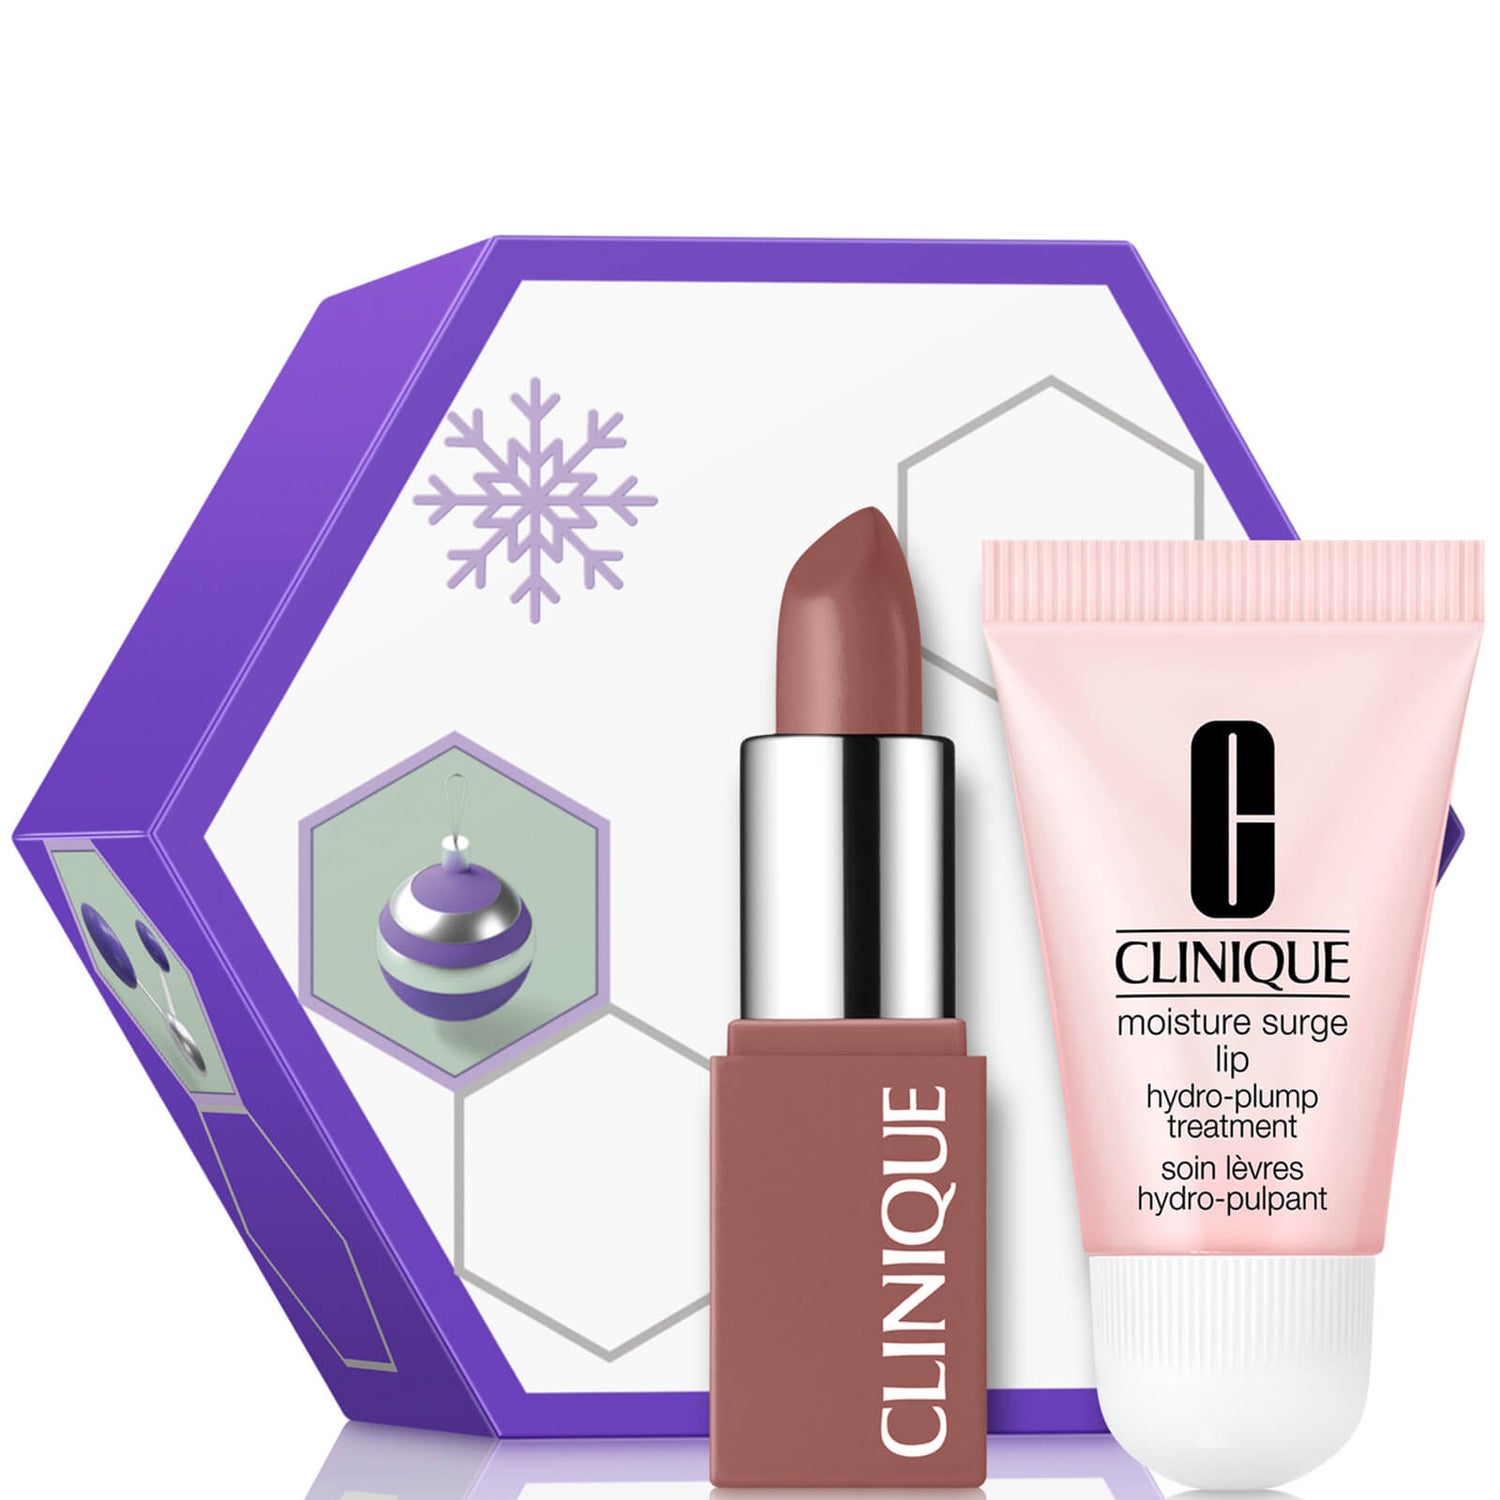 Clinique Lip Luxury Lip Care and Lipstick Makeup Gift Set (Worth £24.28)